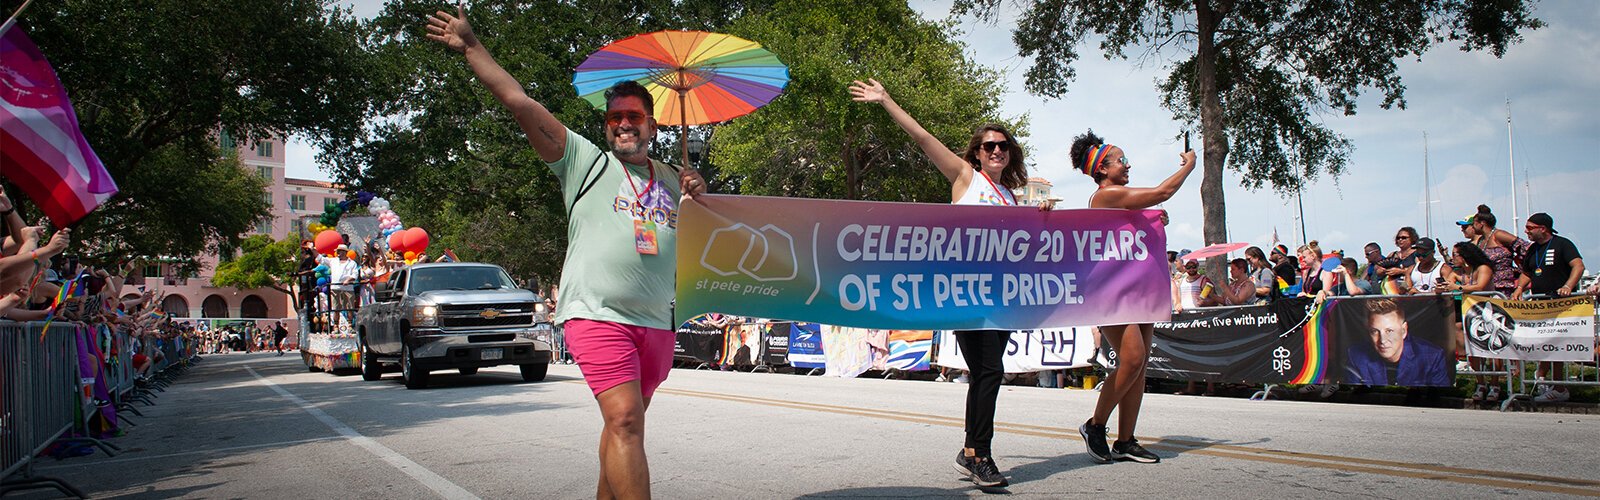 A banner near the front of the St. Pete Pride Parade announces the event's 20th anniversary.